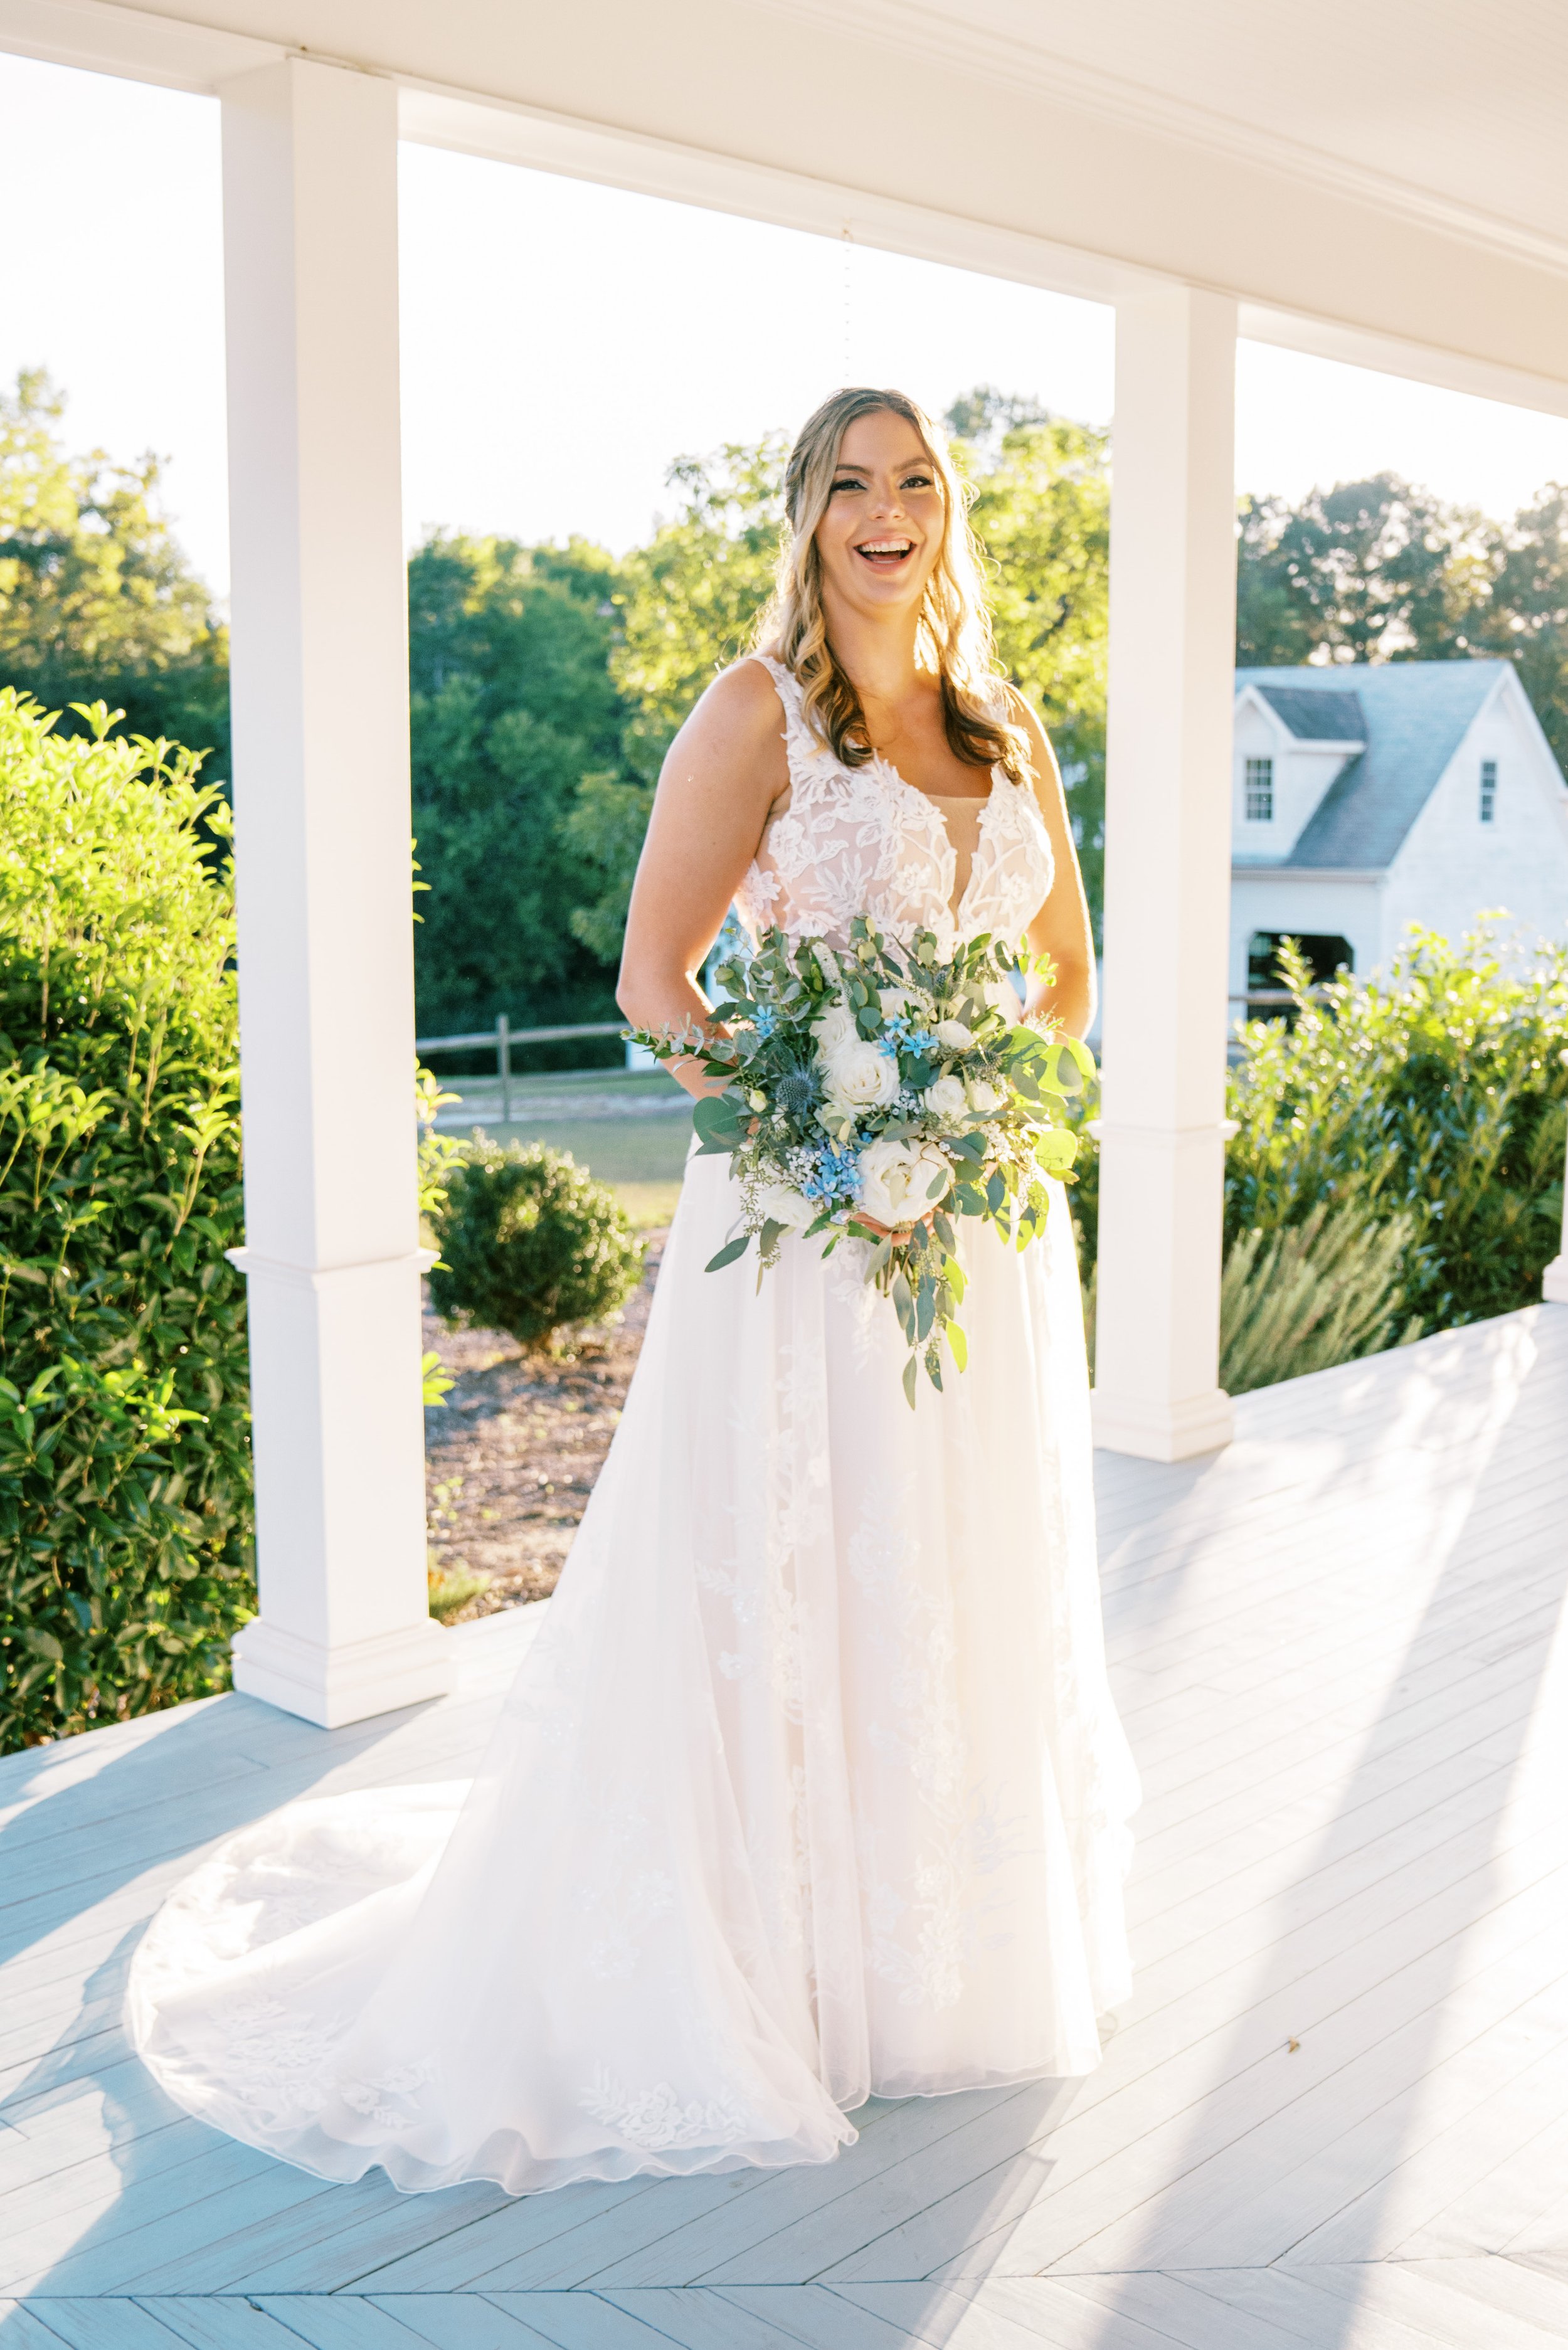 Bride Raleigh Event Space Walnut Hill Wedding Venue Fancy This Photography